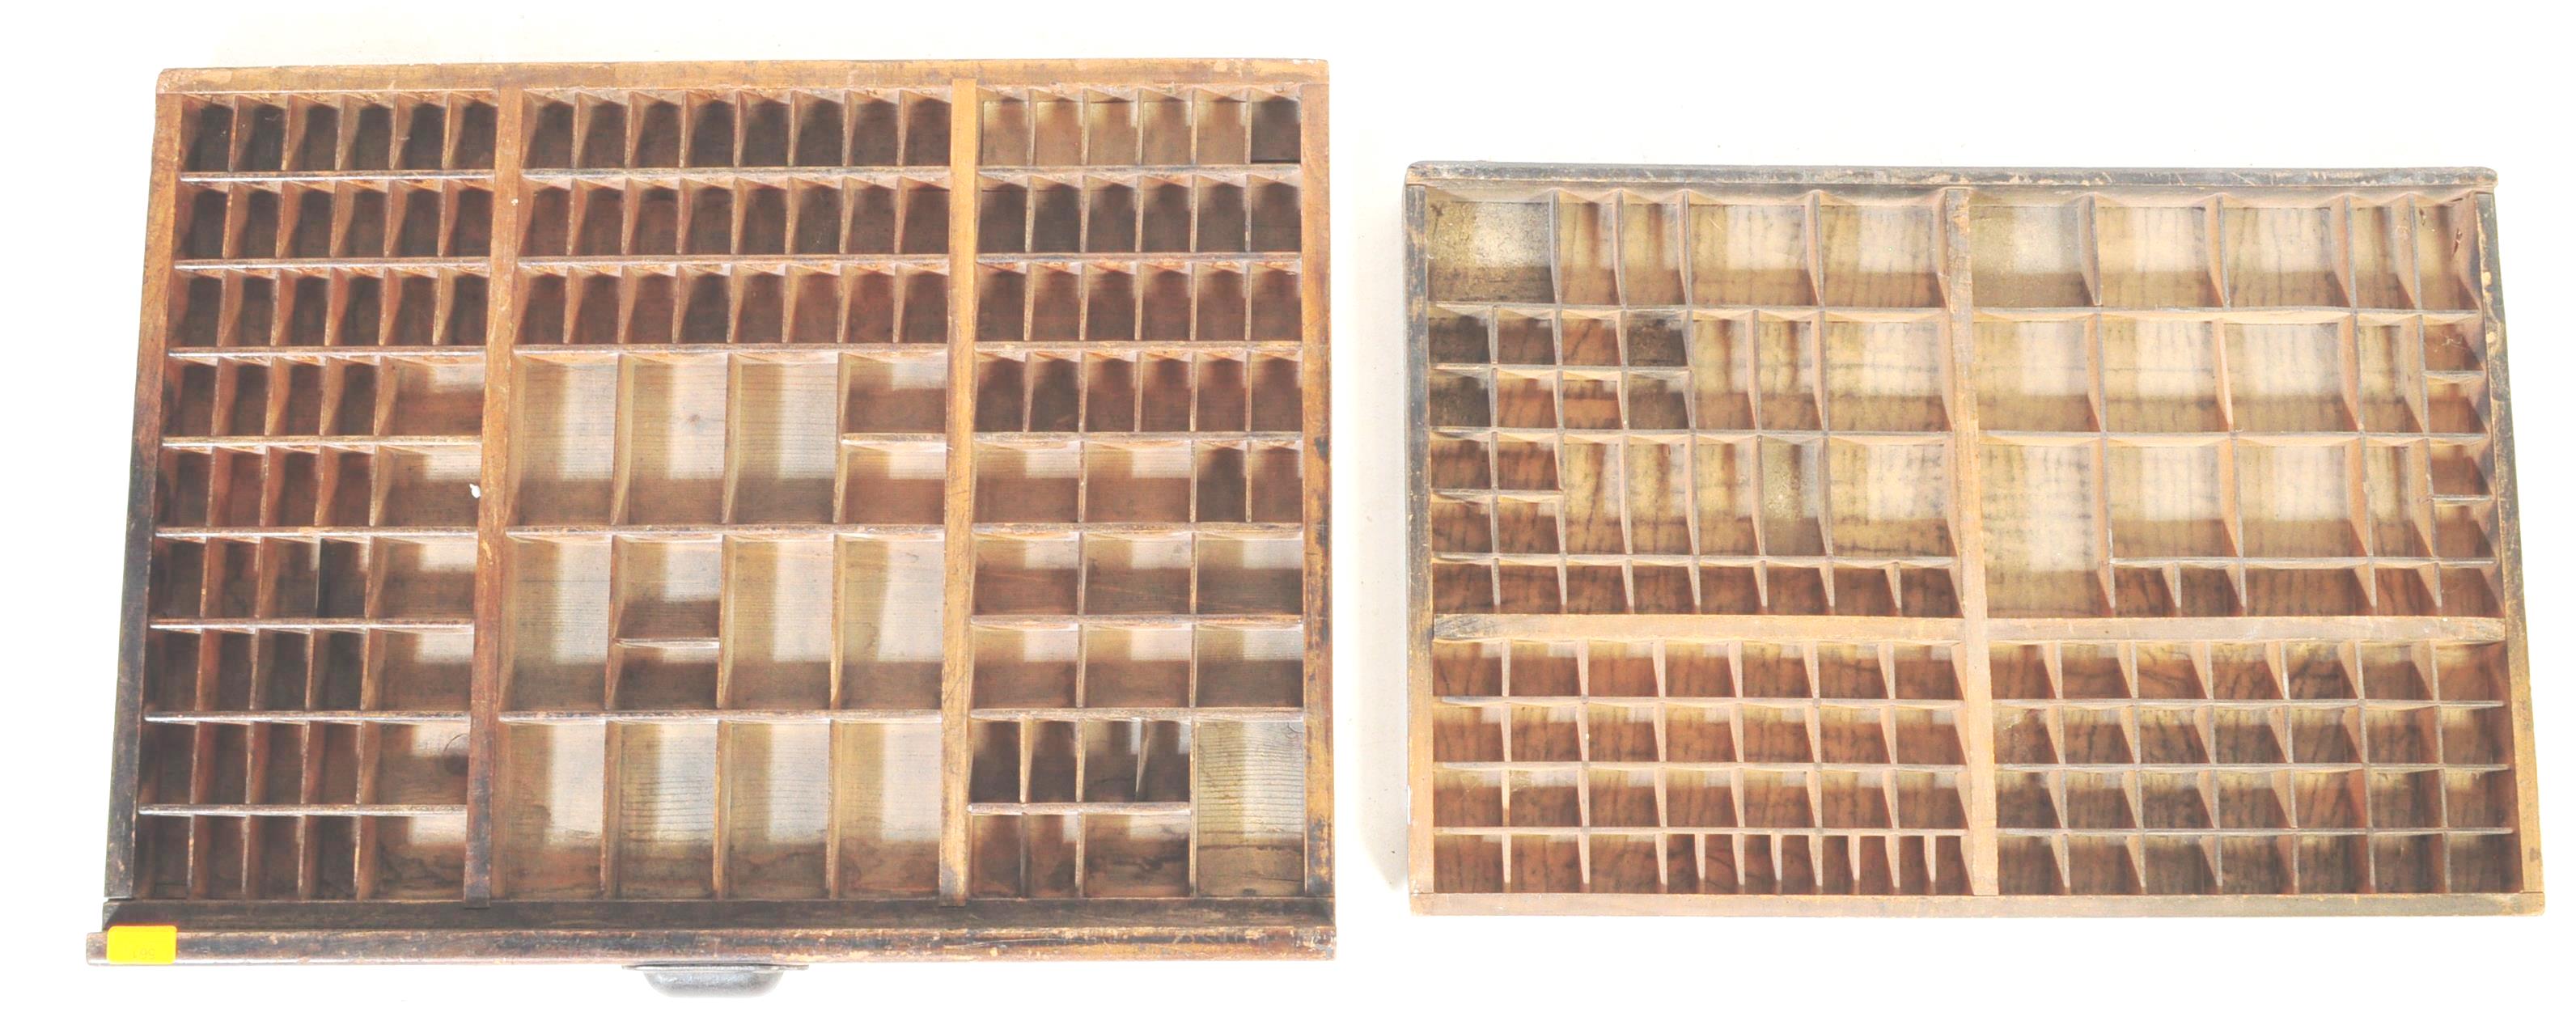 TWO EARLY 20TH CENTURY WOODEN PRINTER TRAYS